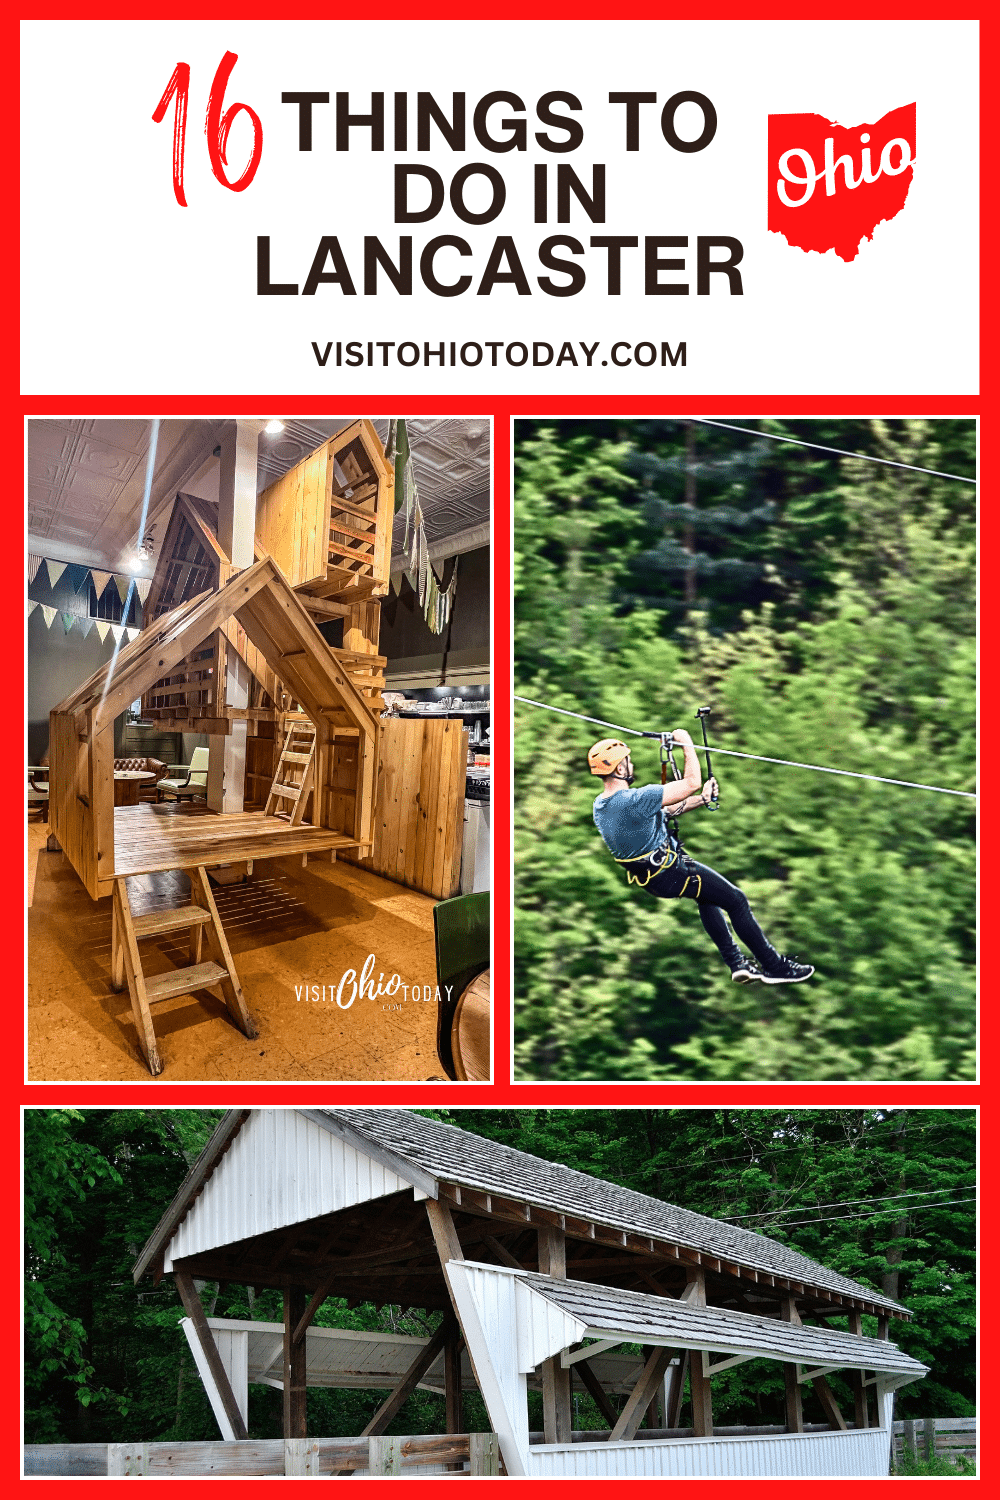 Lancaster is located in Fairfield County, Central Ohio. Lancaster Ohio is known as the gateway to the stunning Hocking Hills area and it is also known for its glass industry. Here are some of our top things to do in Lancaster Ohio for all ages to enjoy! | Things To Do In Lancaster Ohio | Fairfield County Ohio | Visit Ohio Today